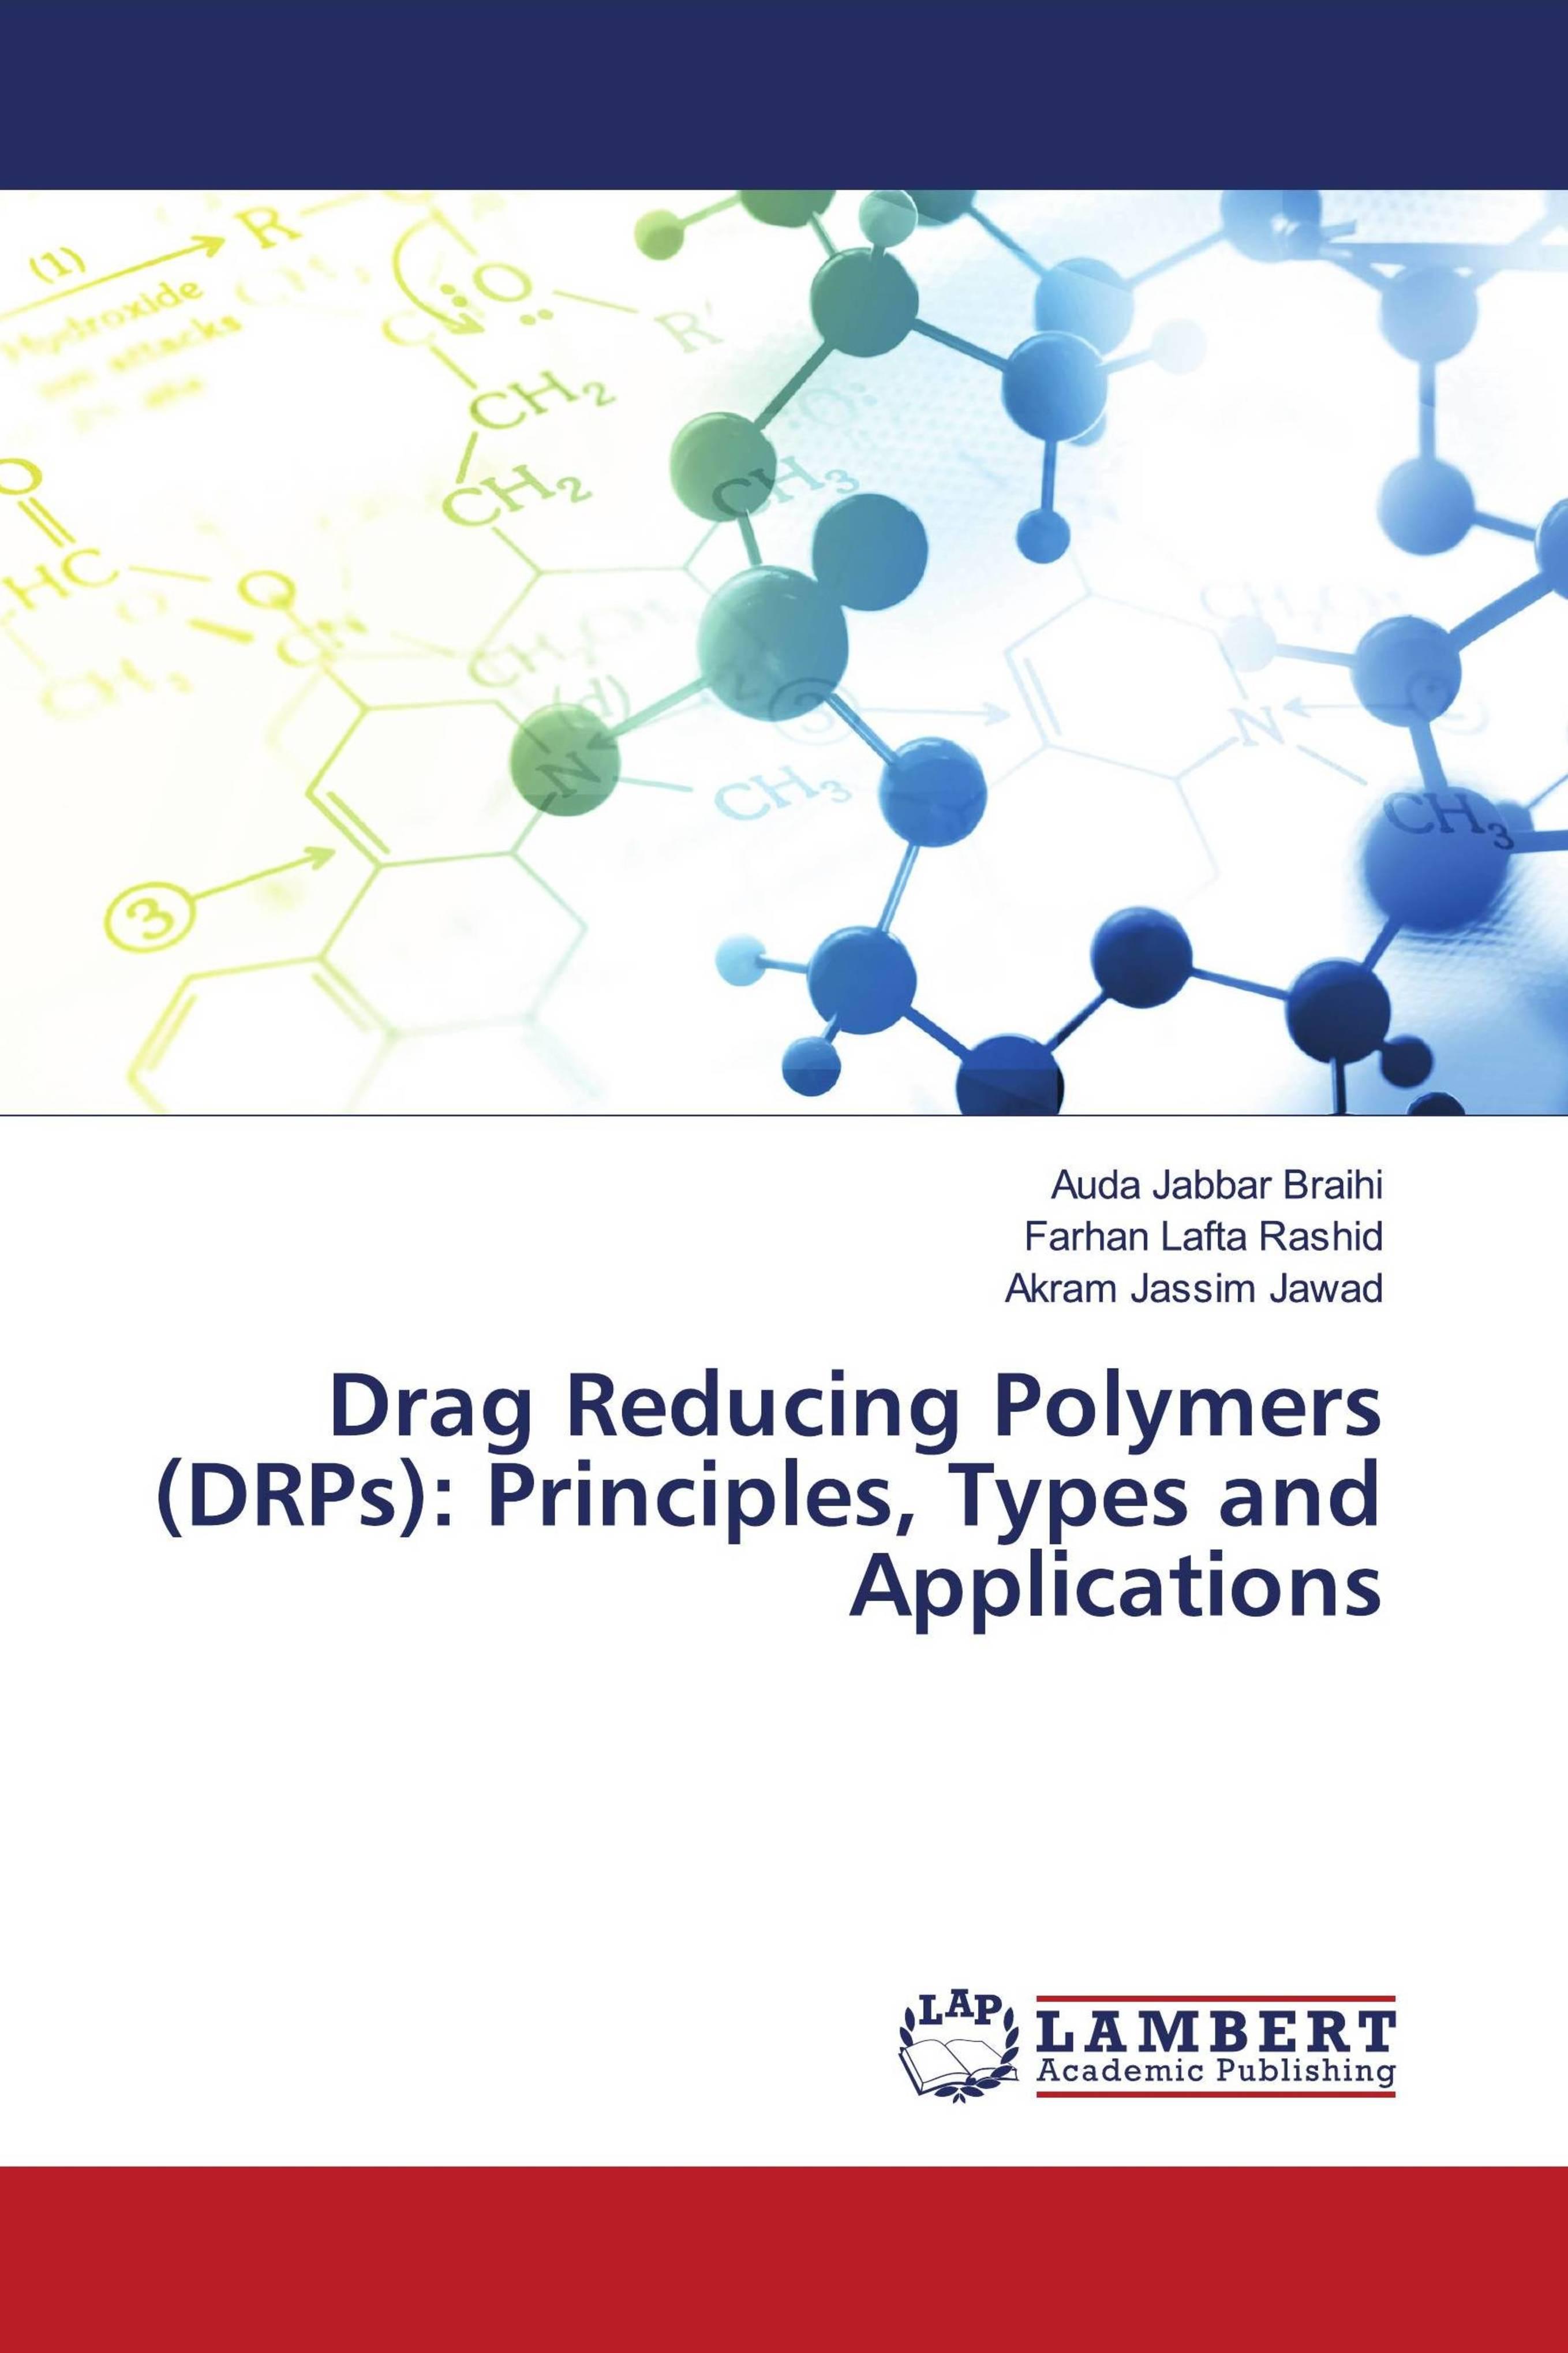 Drag Reducing Polymers (DRPs): Principles, Types